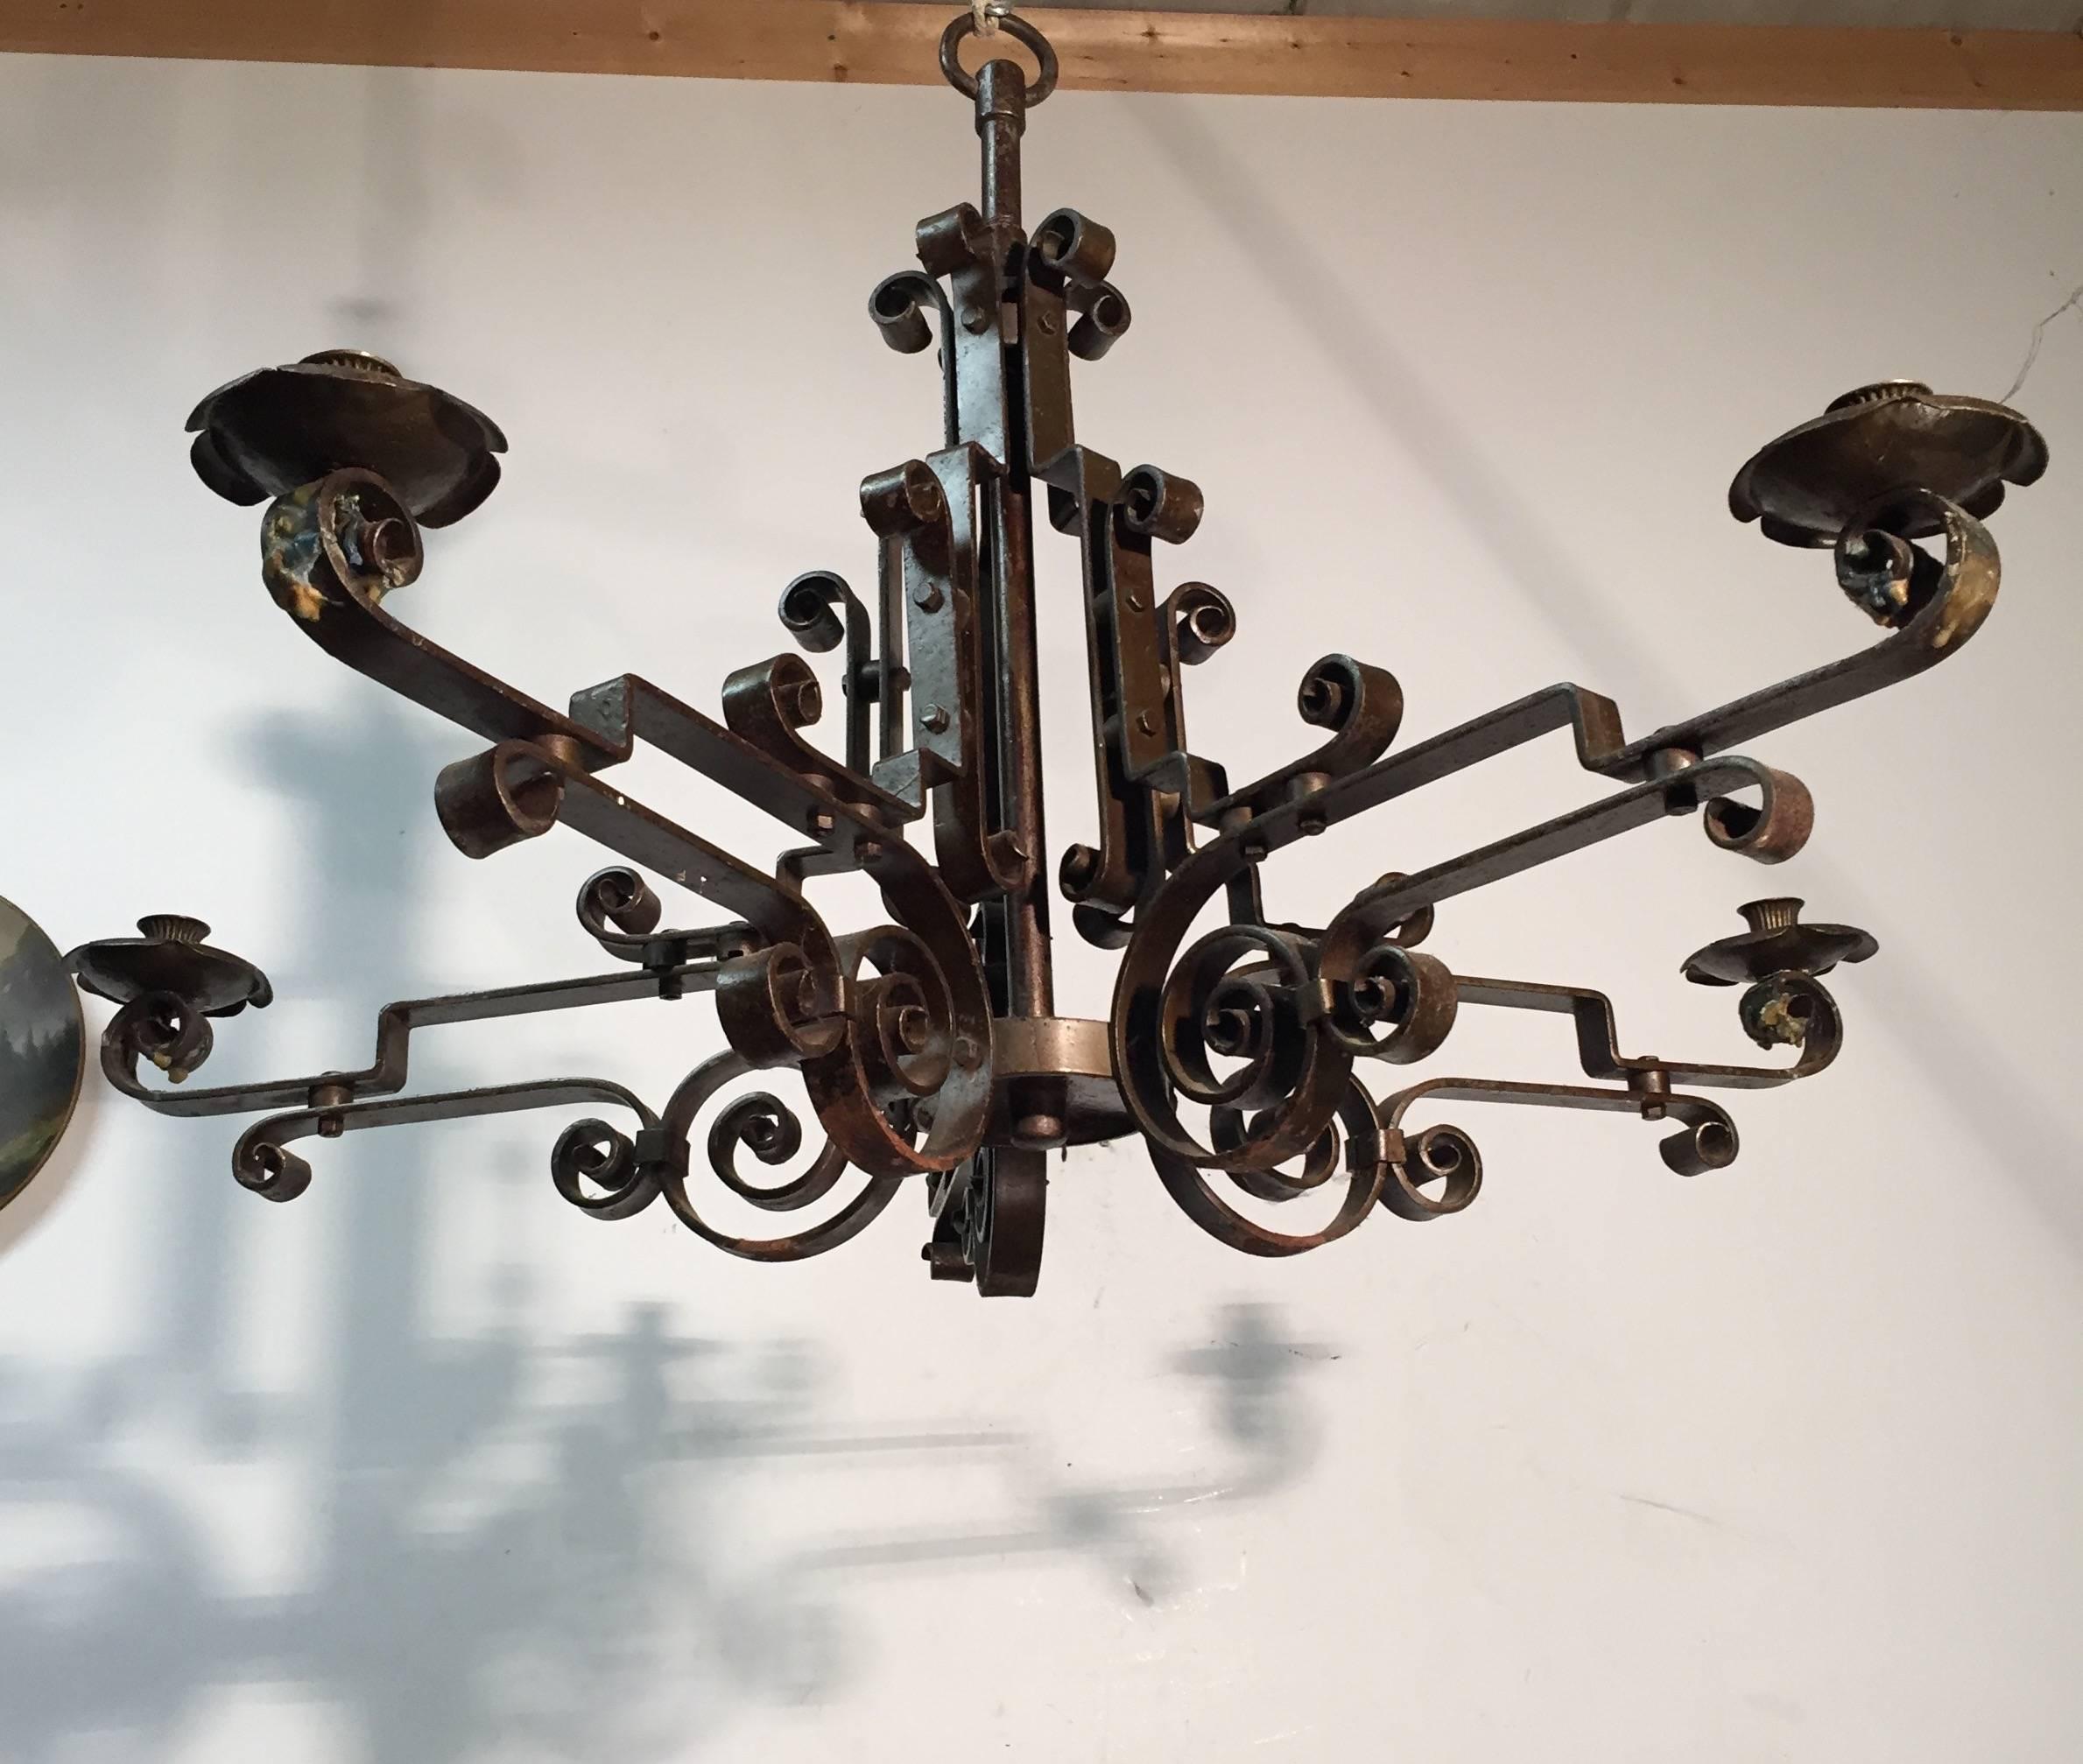 Large hand crafted chandelier for candles. . .can also be made electrical.

This beautifully designed 5 arm wrought iron pendant from circa 1940 is in good condition. The symmetrical and scrolled arms are very stylish in shape and a craftsman has